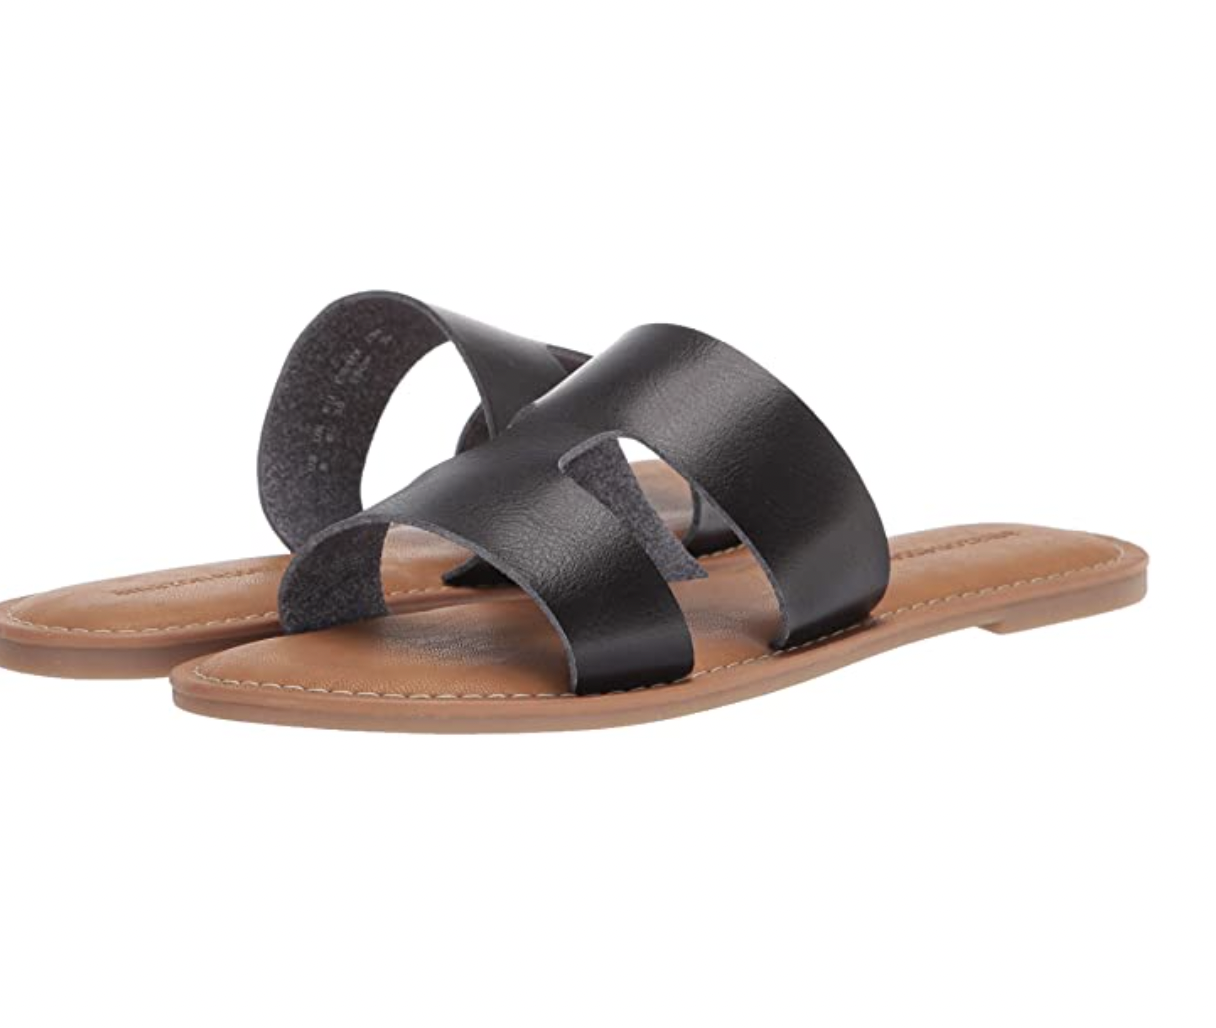 10 Most Comfortable Sandals on Amazon, According to Reviews